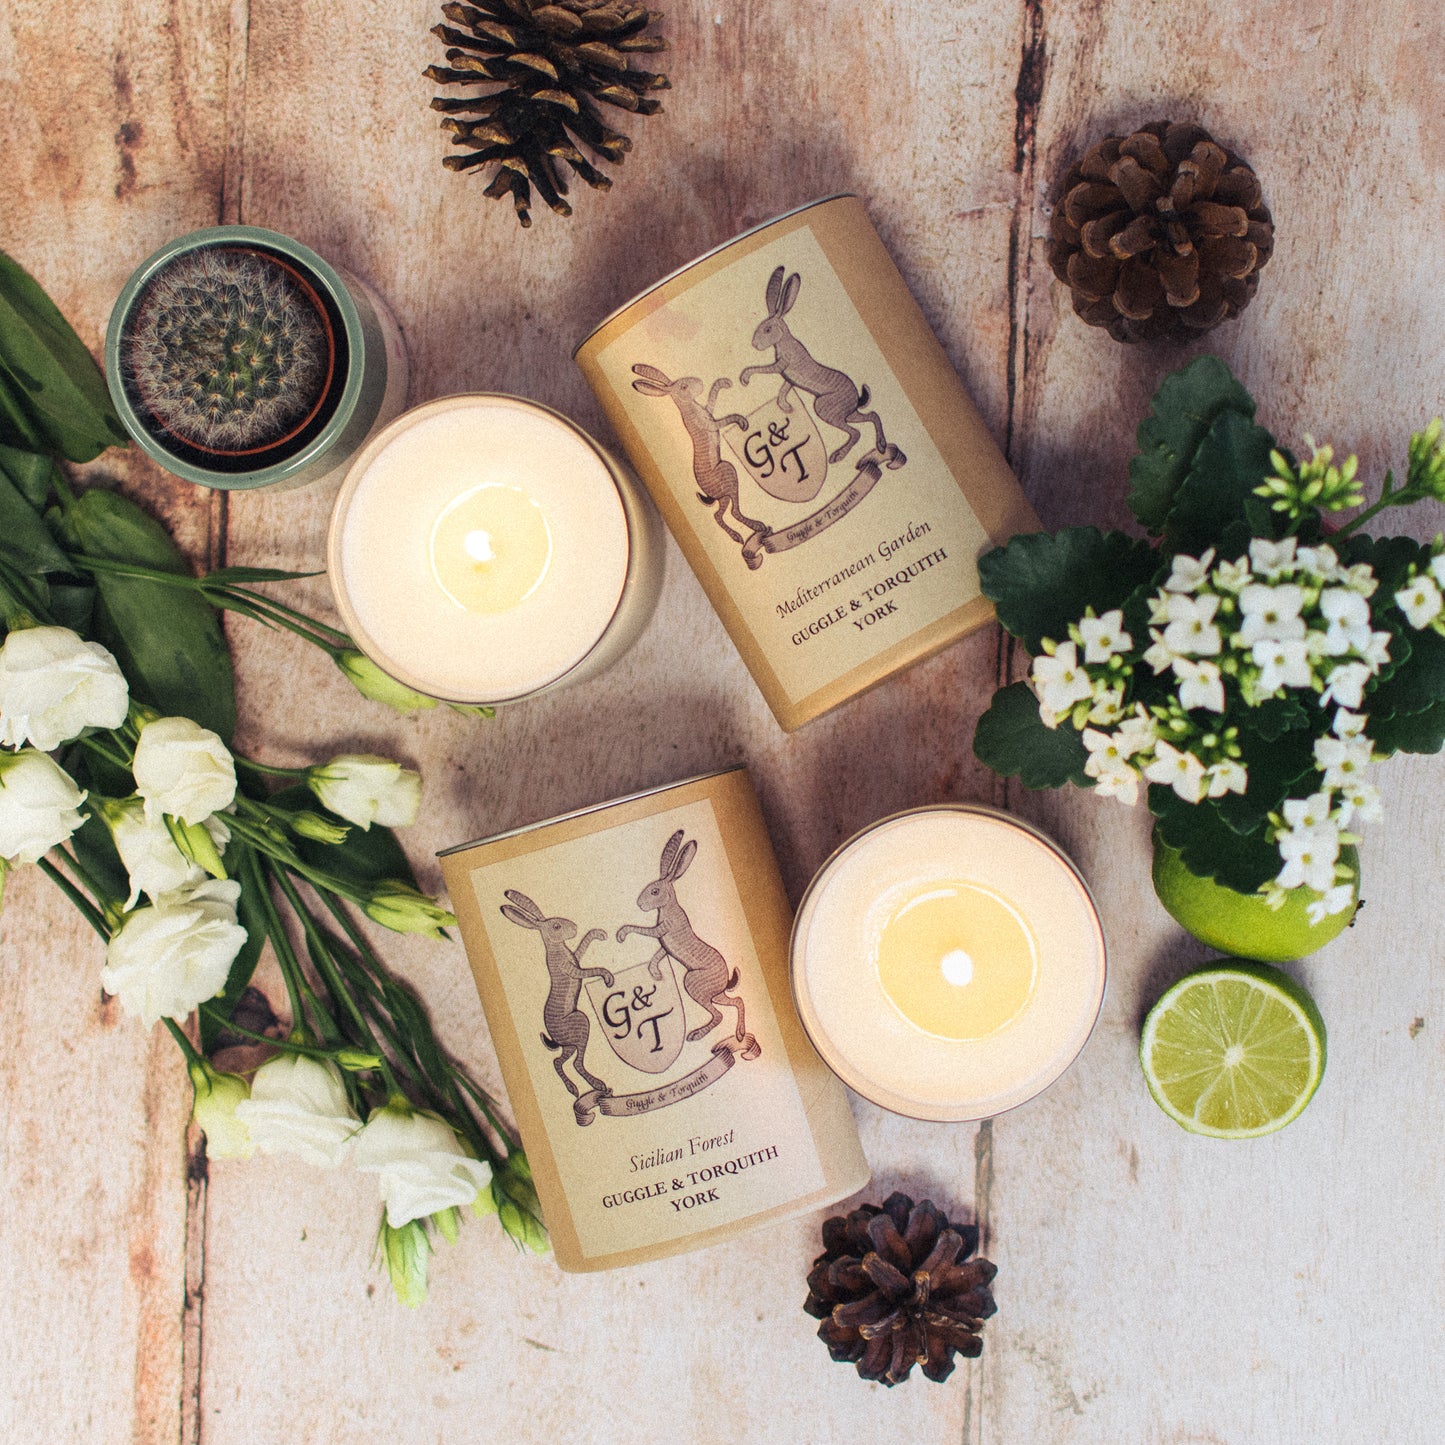 Guggle and Torquith Candles Handmade in East Riding of Yorkshire - Country Home Fragrance